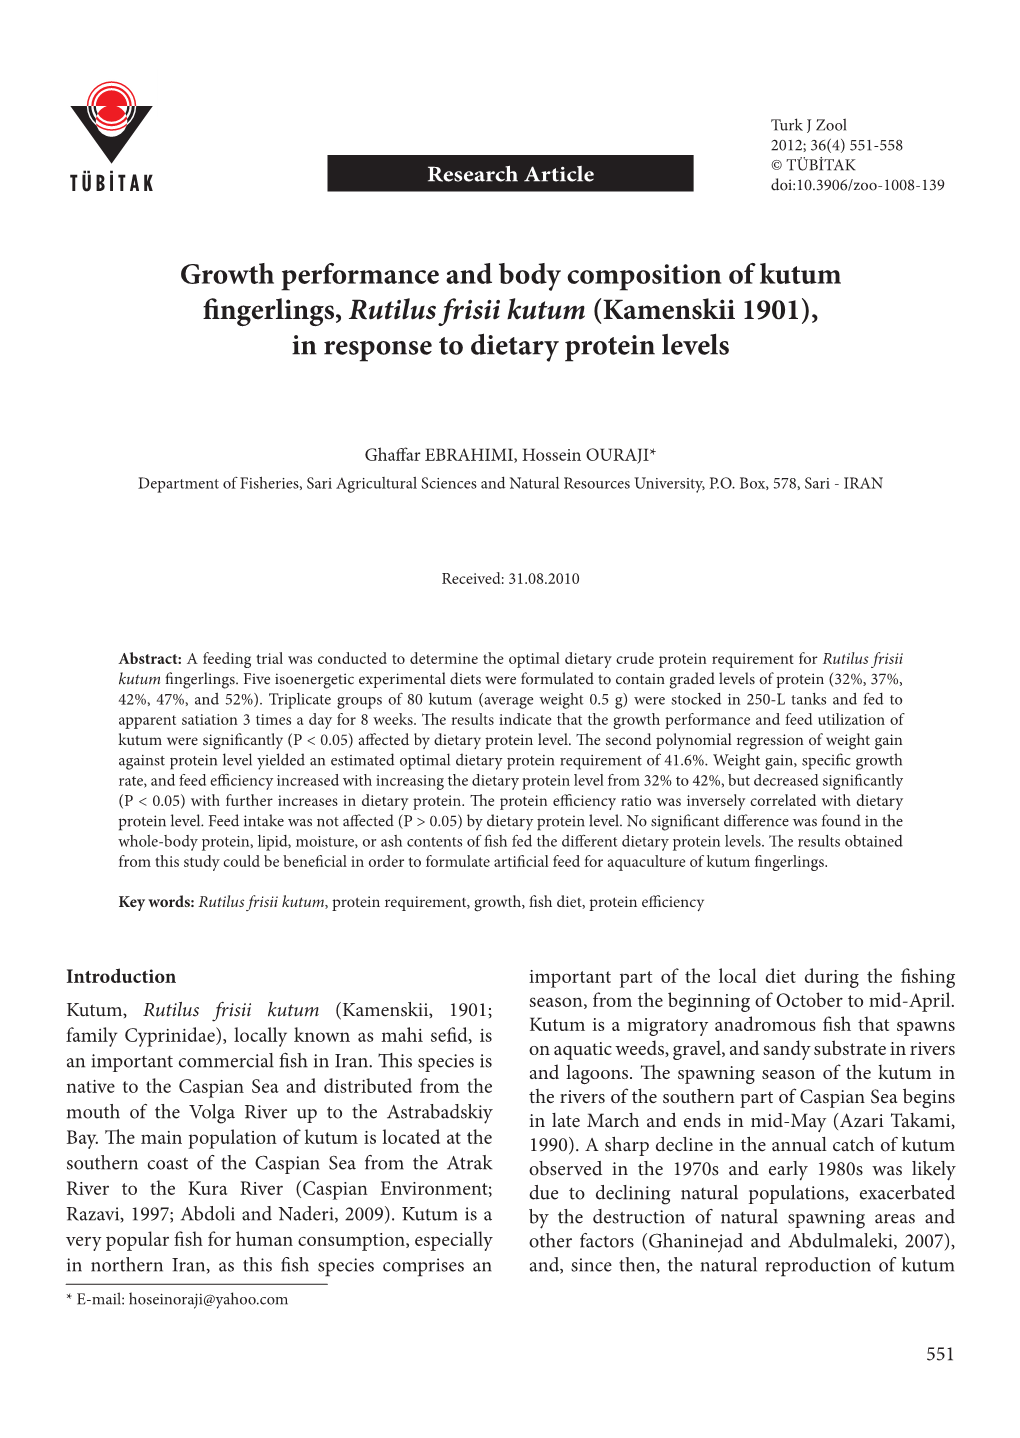 Growth Performance and Body Composition of Kutum Fingerlings, Rutilus Frisii Kutum